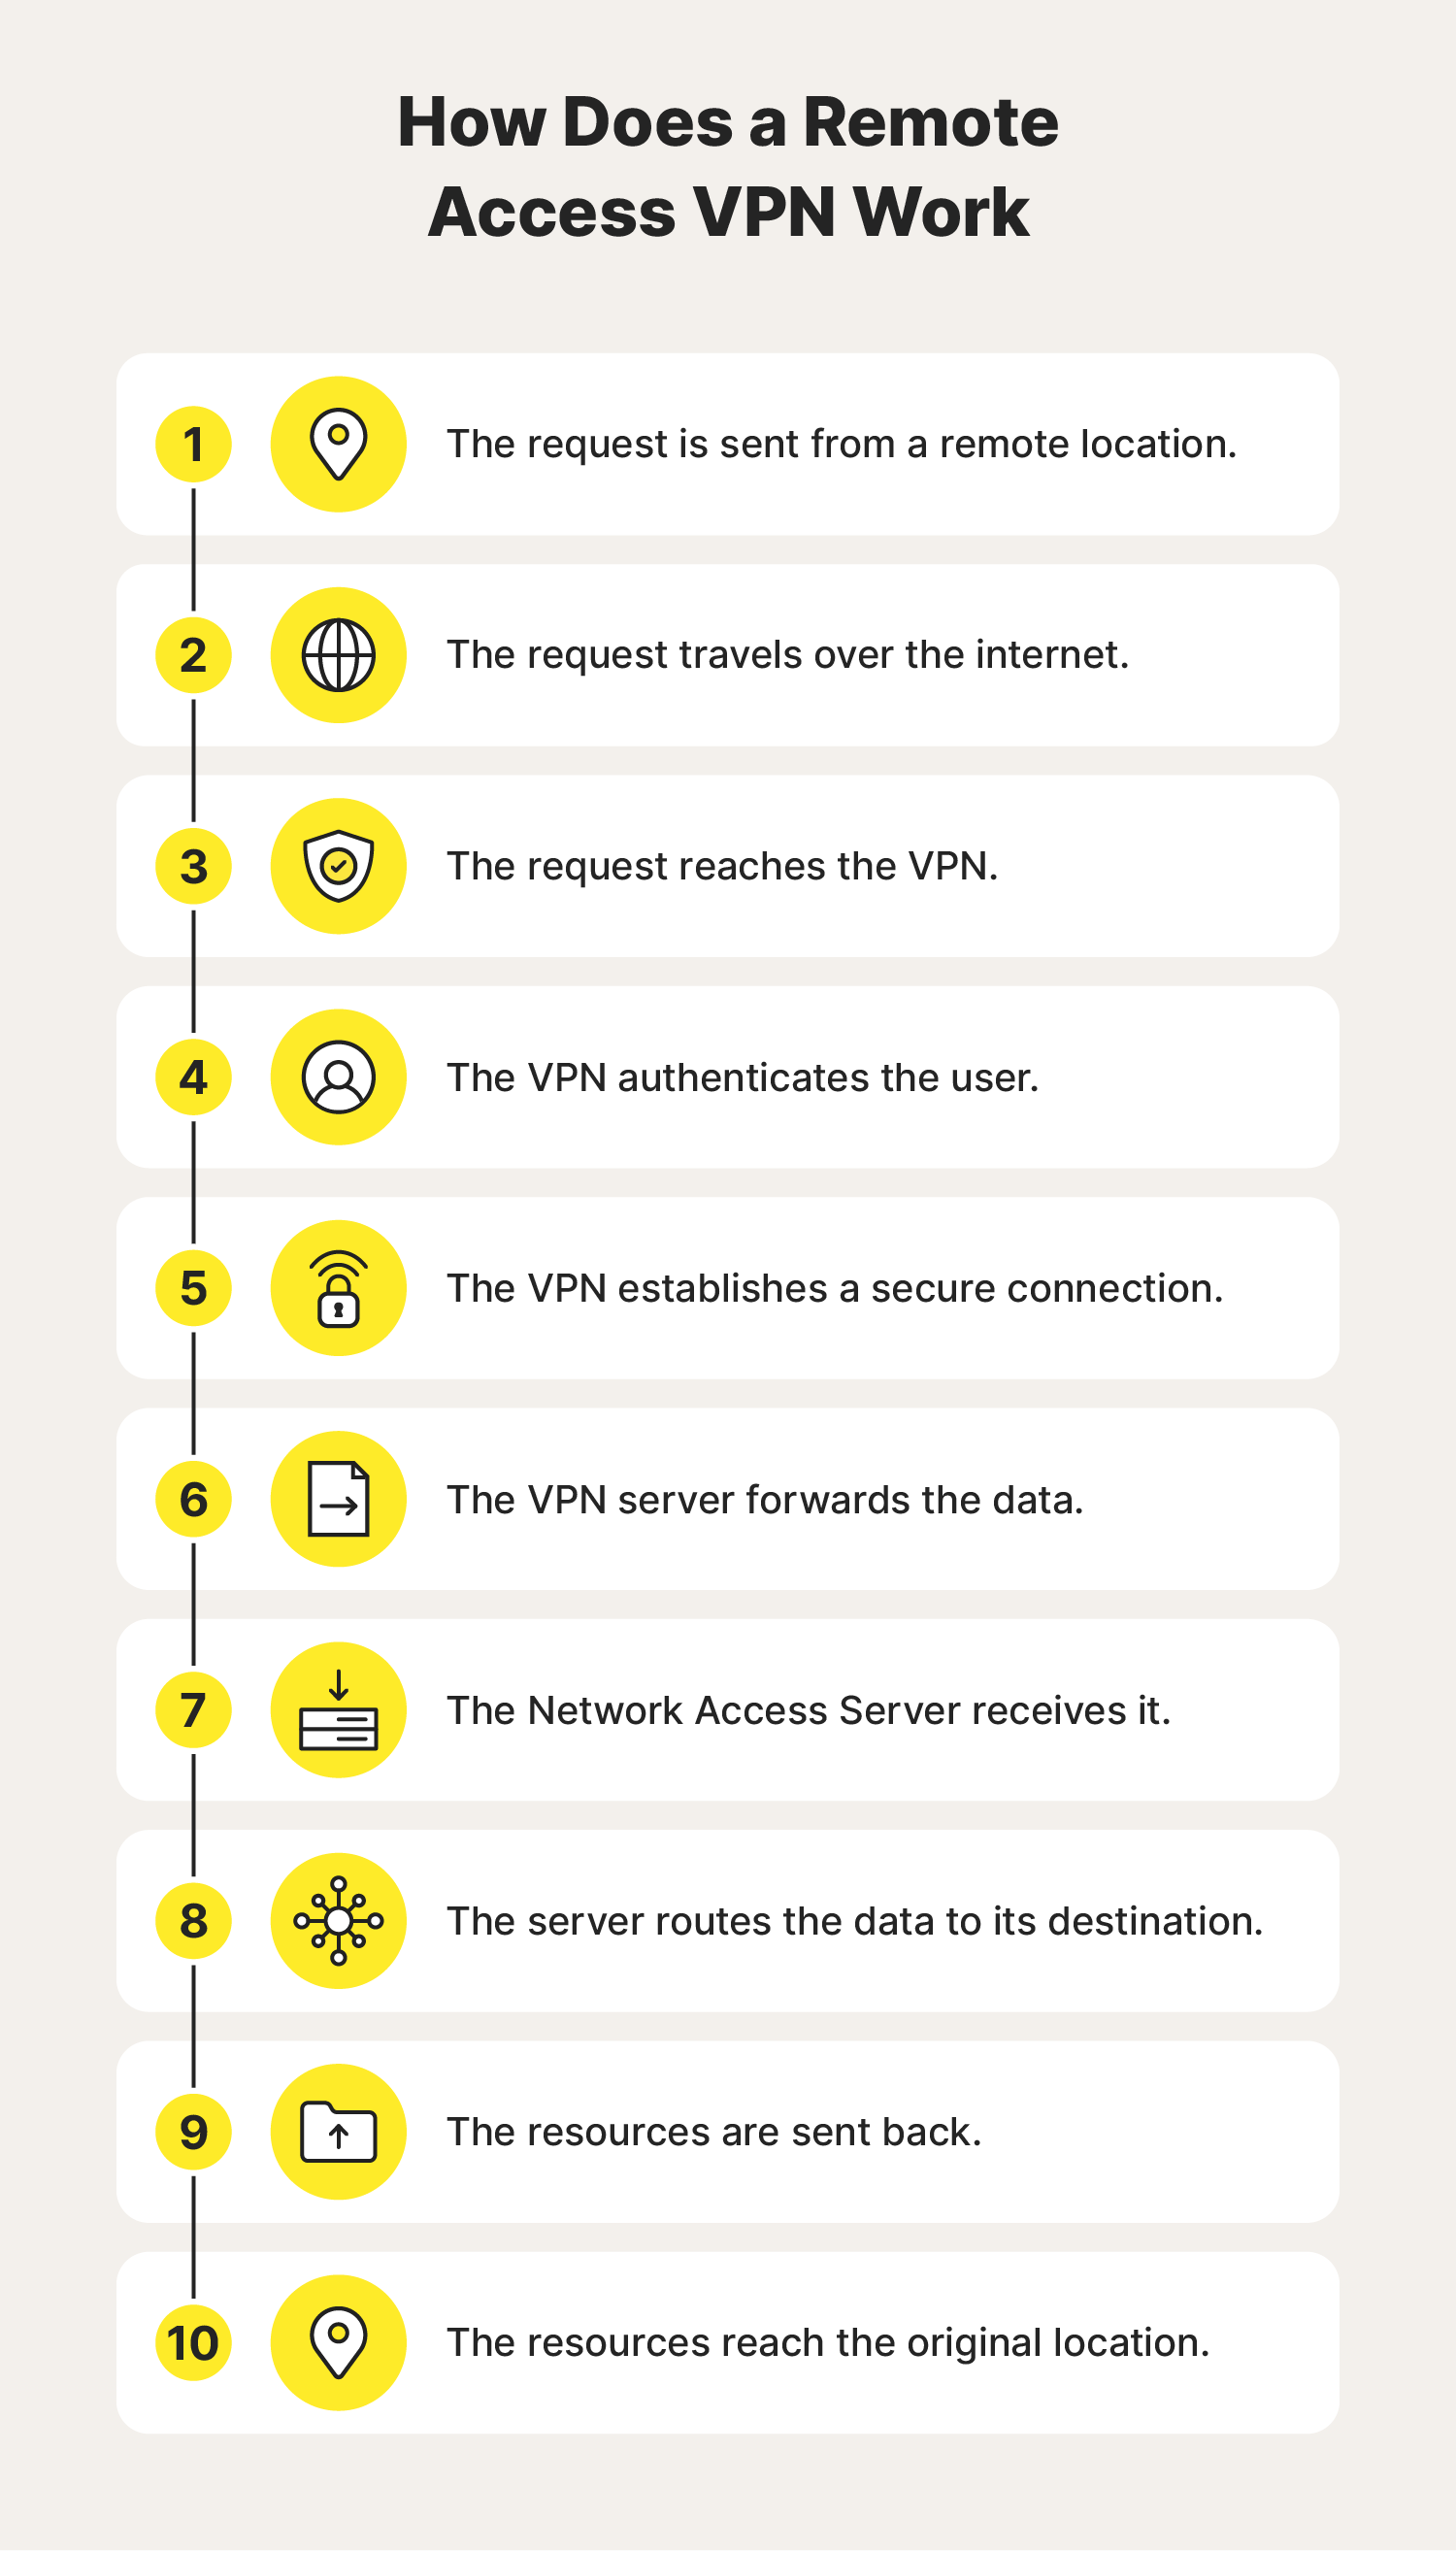 A diagram showing how a remote access VPN works.